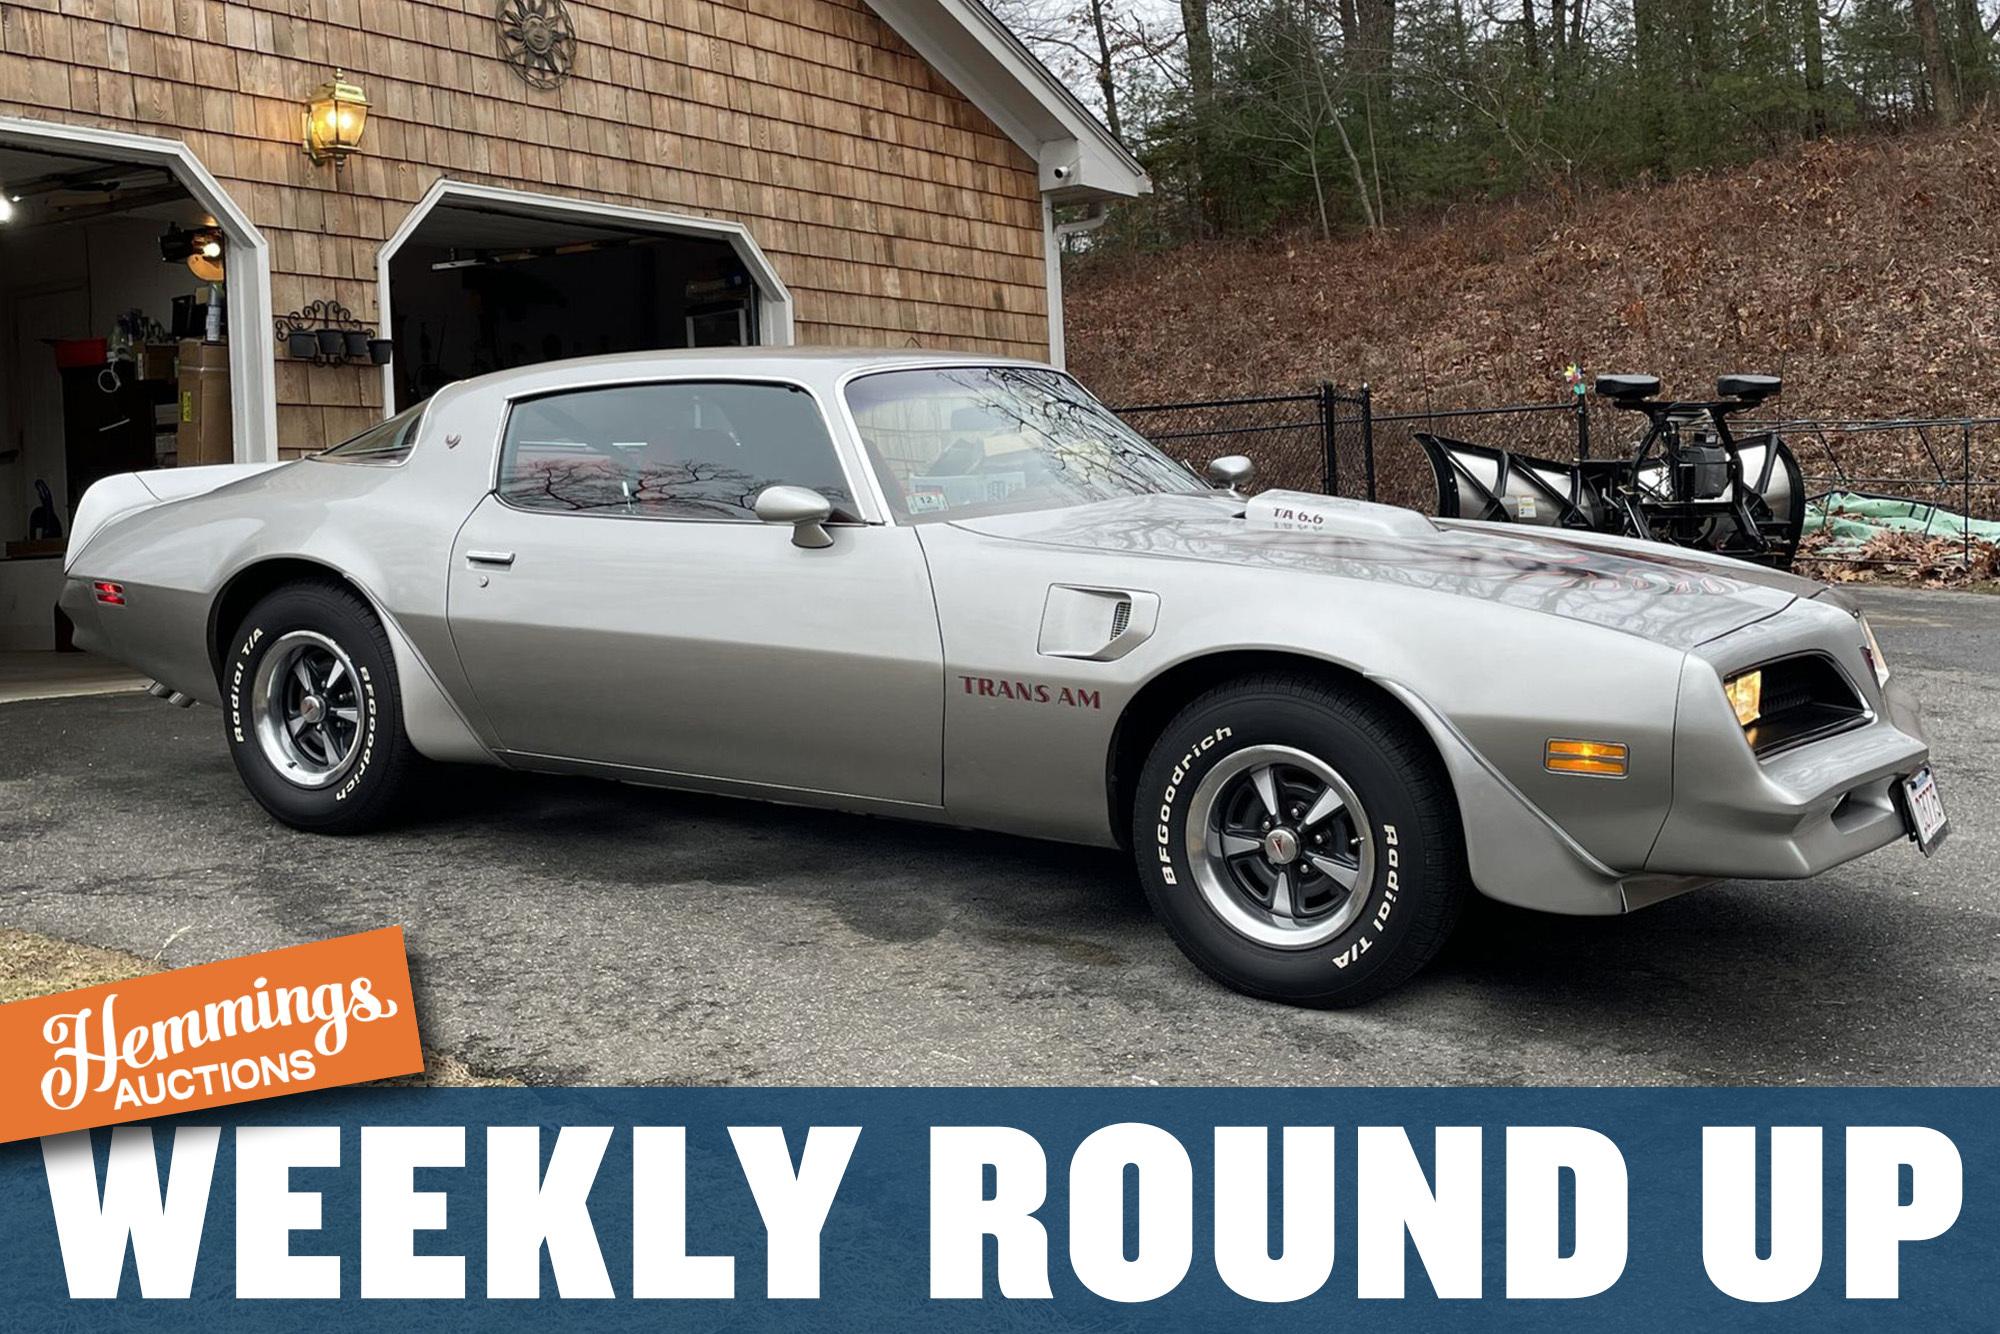 Hemmings Auctions Weekly Round Up: An Original 1978 Pontiac Trans Am, Low-Mile 2004 Maserati Coupe, and 1947 Buick Super 8 Street Rod